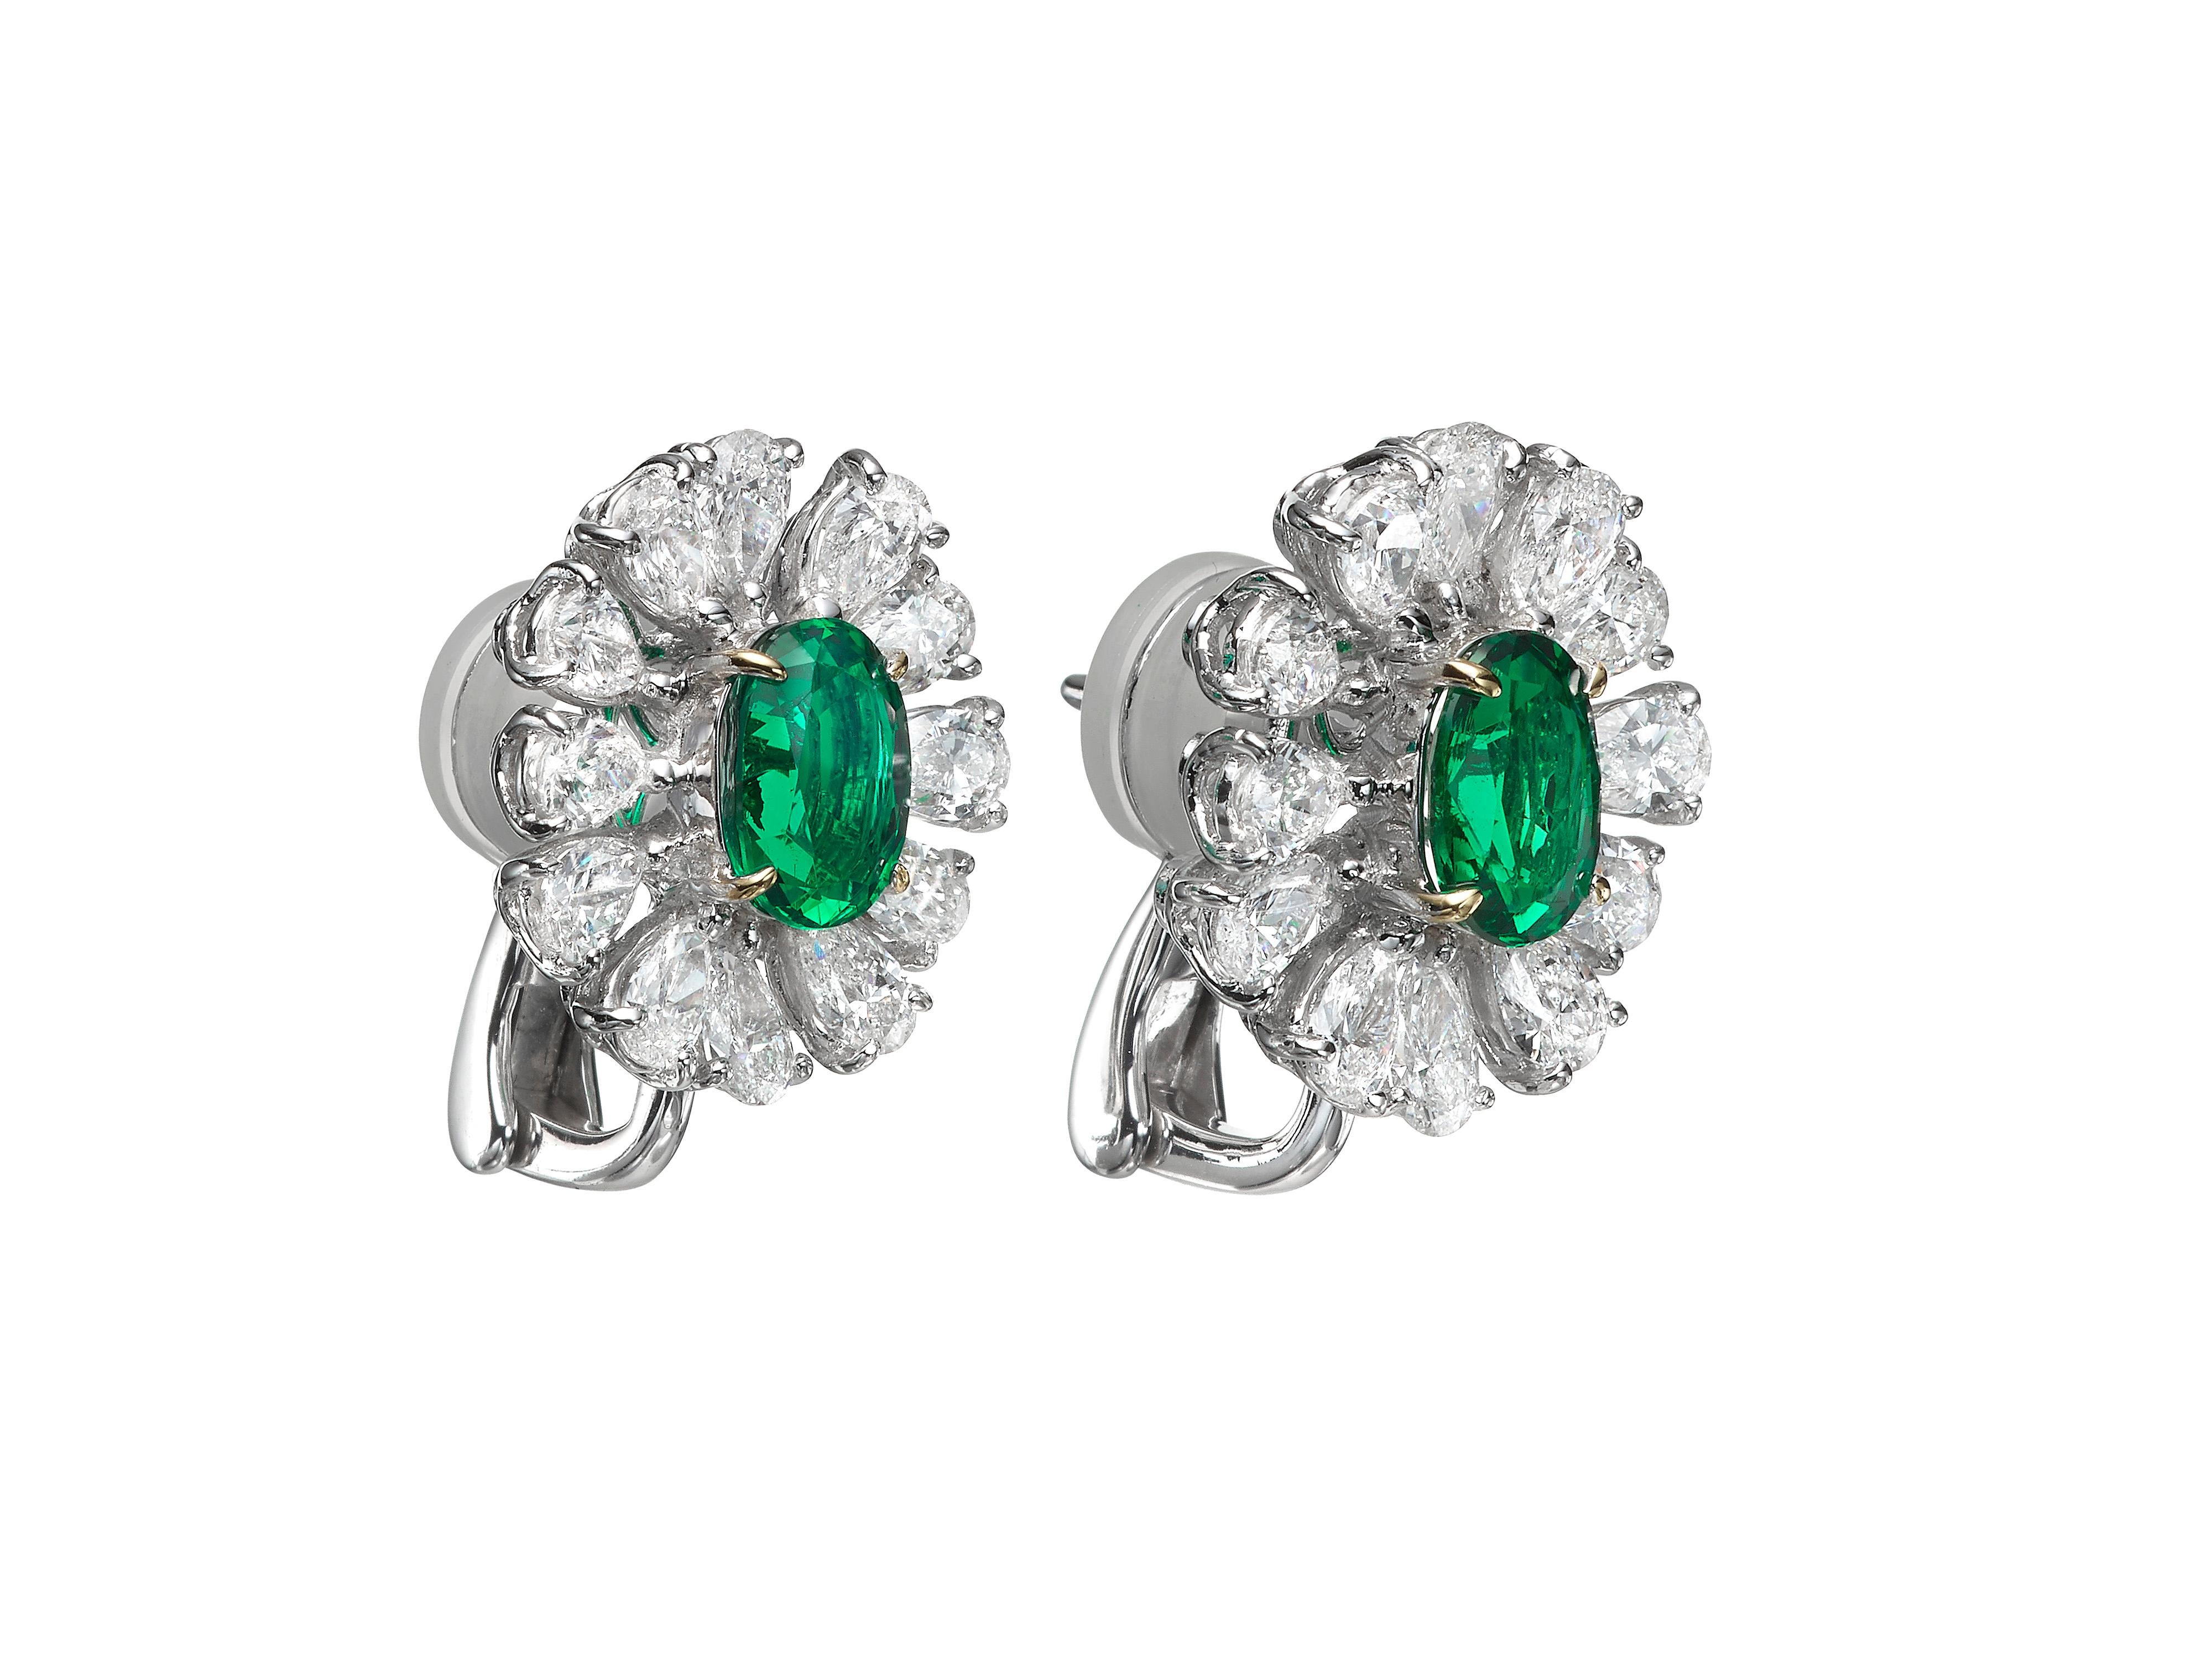 Understatedly elegant diamond stud earrings feature a center oval Emerald accented by a halo of pear-shape diamonds.  Total emerald weight 2.51 carats.  Total diamond weight 3.52 carats.  In 18k white gold.  This design is also available in Butani